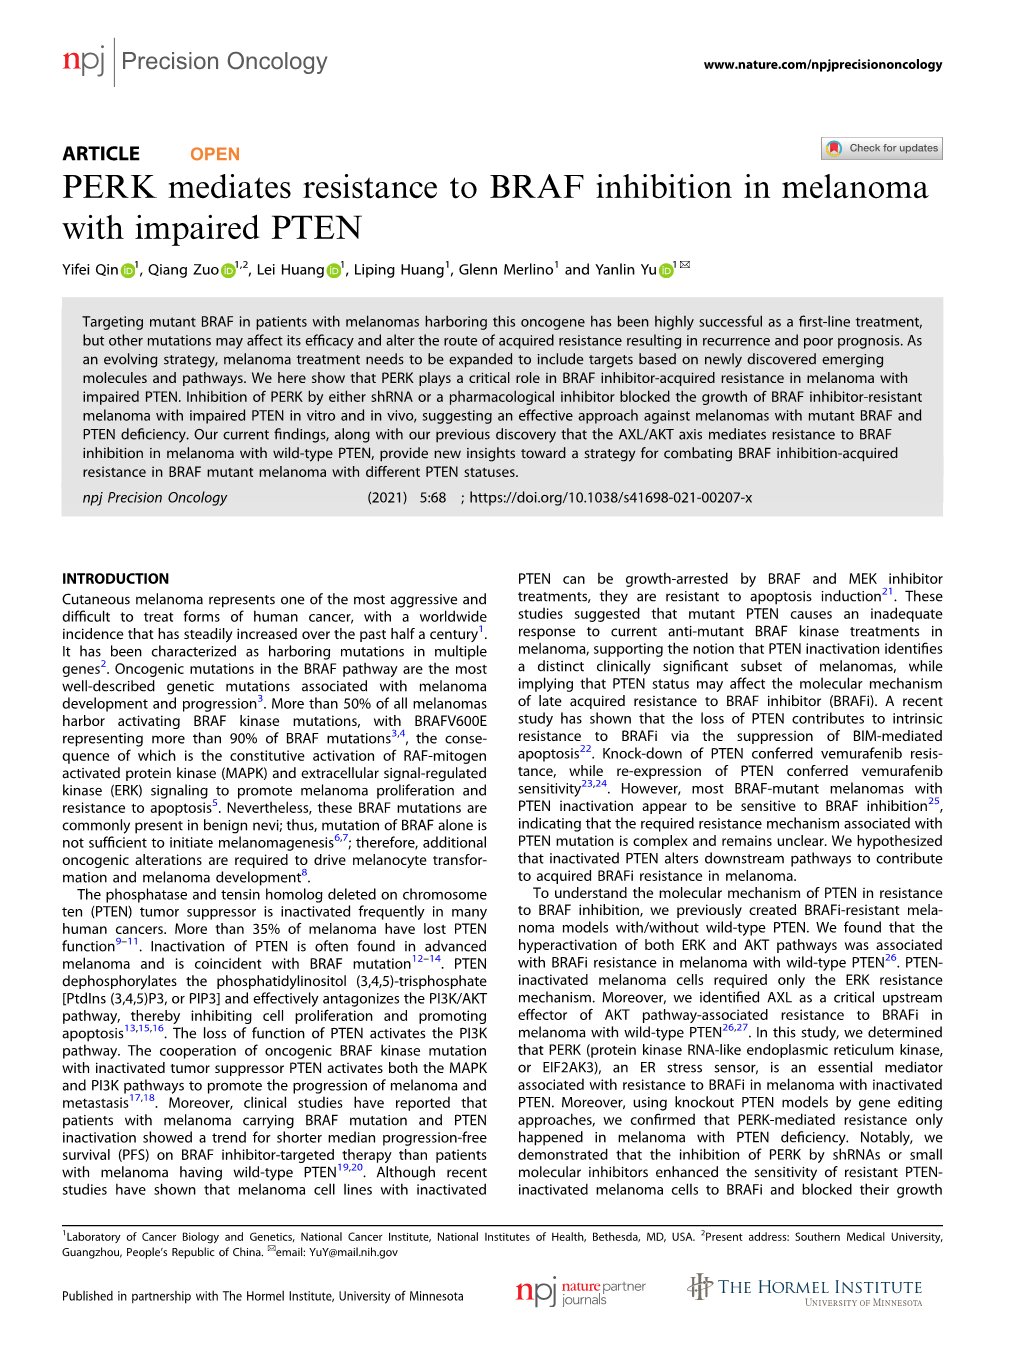 PERK Mediates Resistance to BRAF Inhibition in Melanoma with Impaired PTEN ✉ Yifei Qin 1, Qiang Zuo 1,2, Lei Huang 1, Liping Huang1, Glenn Merlino1 and Yanlin Yu 1